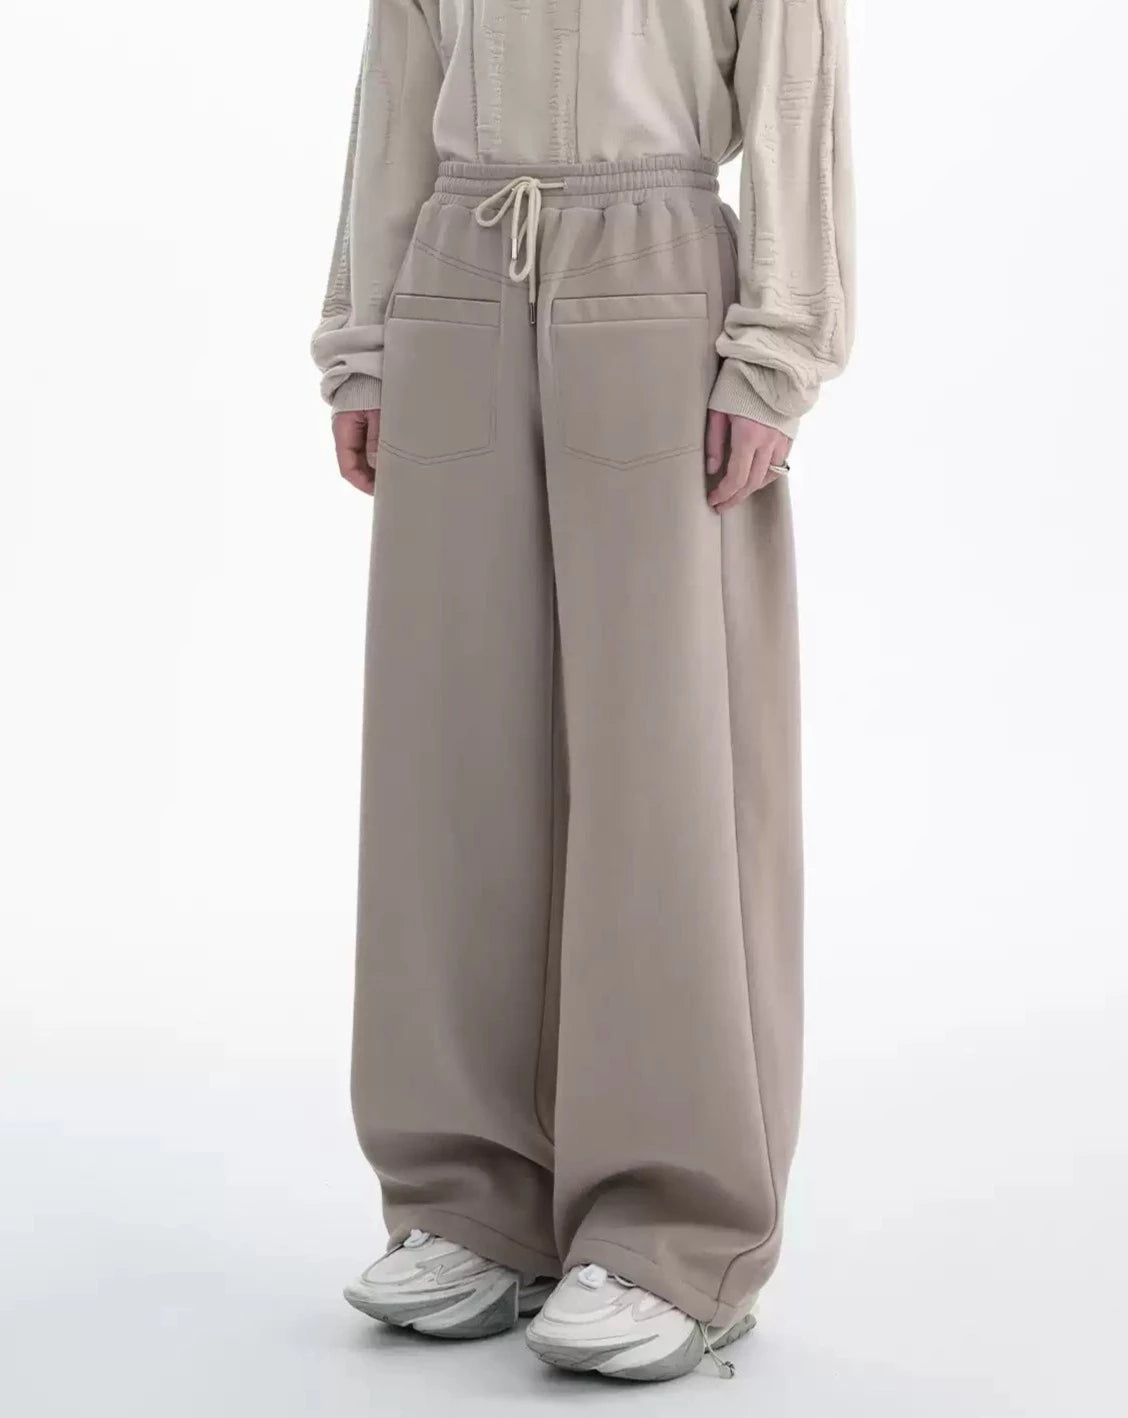 Sweatpants with Dual Front Pockets - chiclara